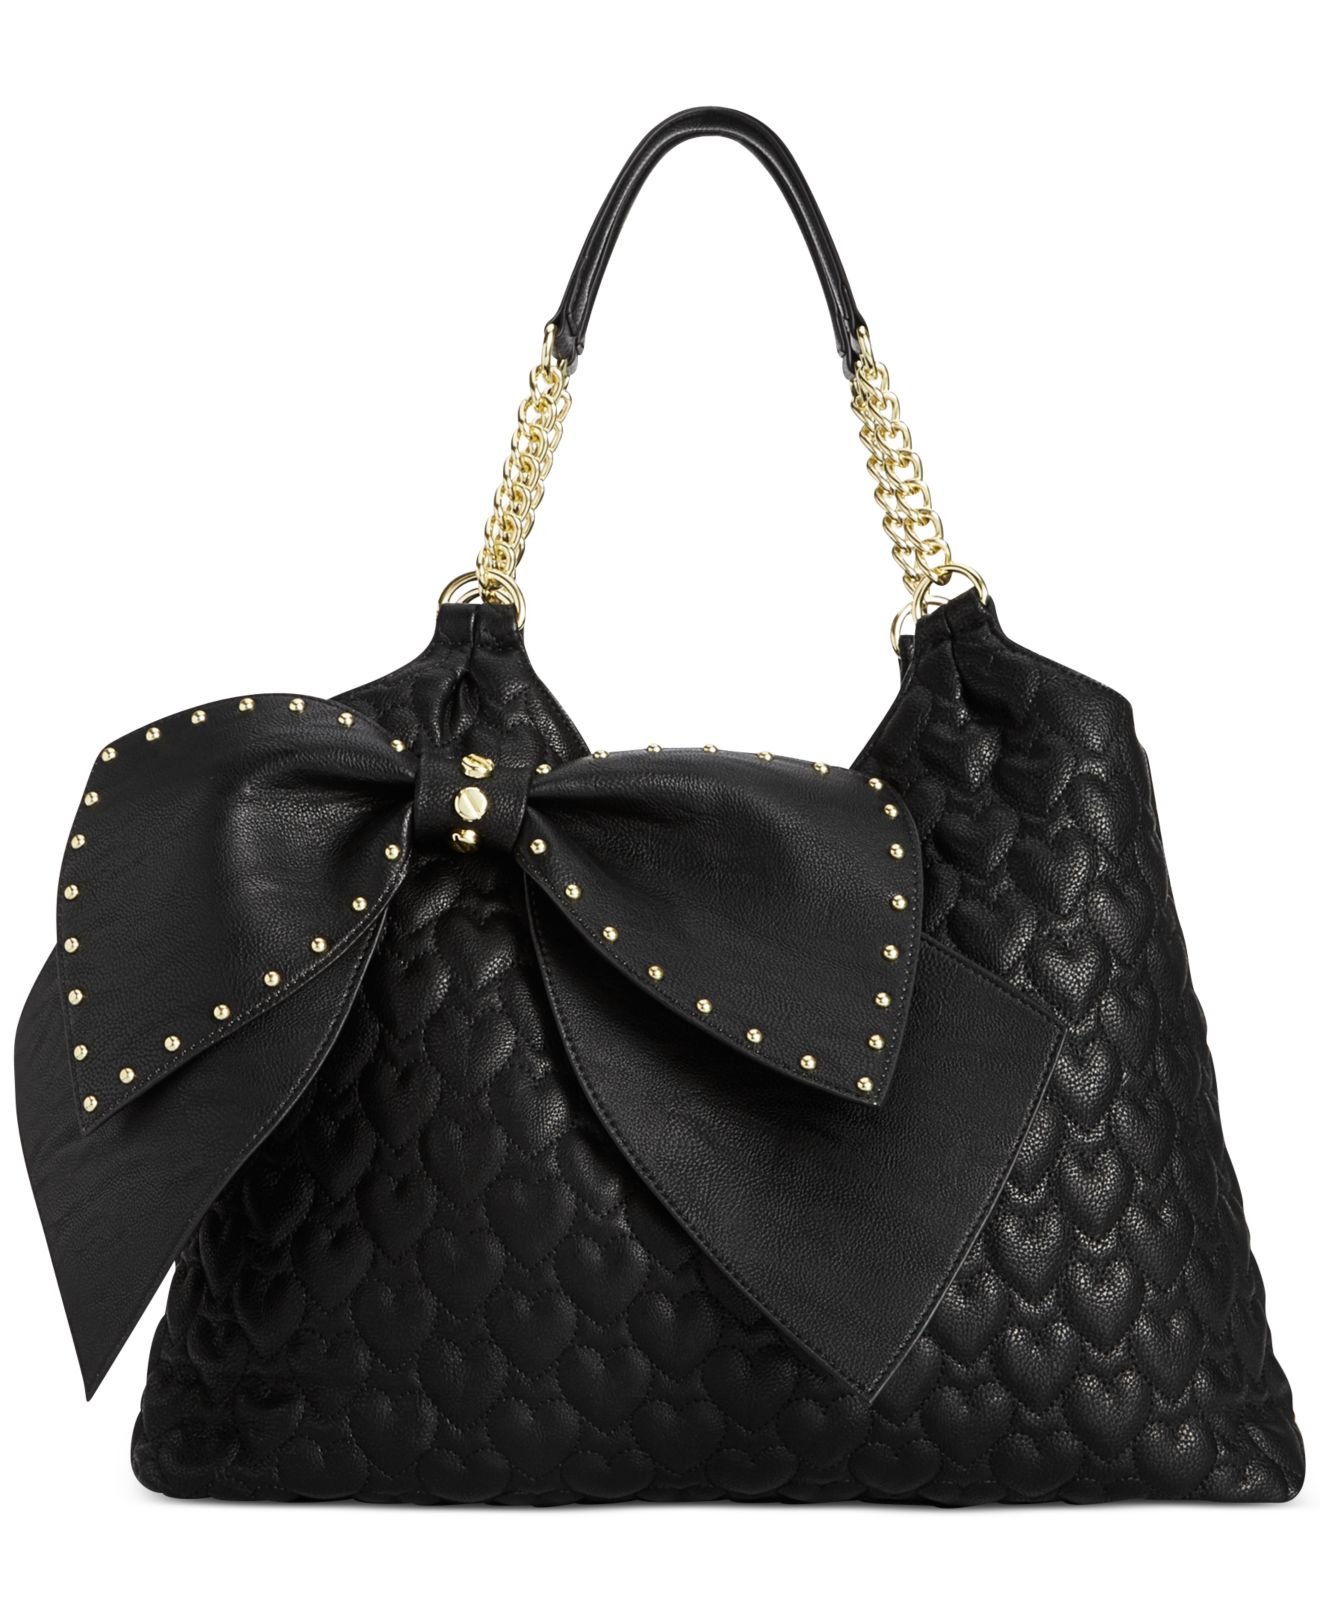 Betsey Johnson Big Bow Tote in Black